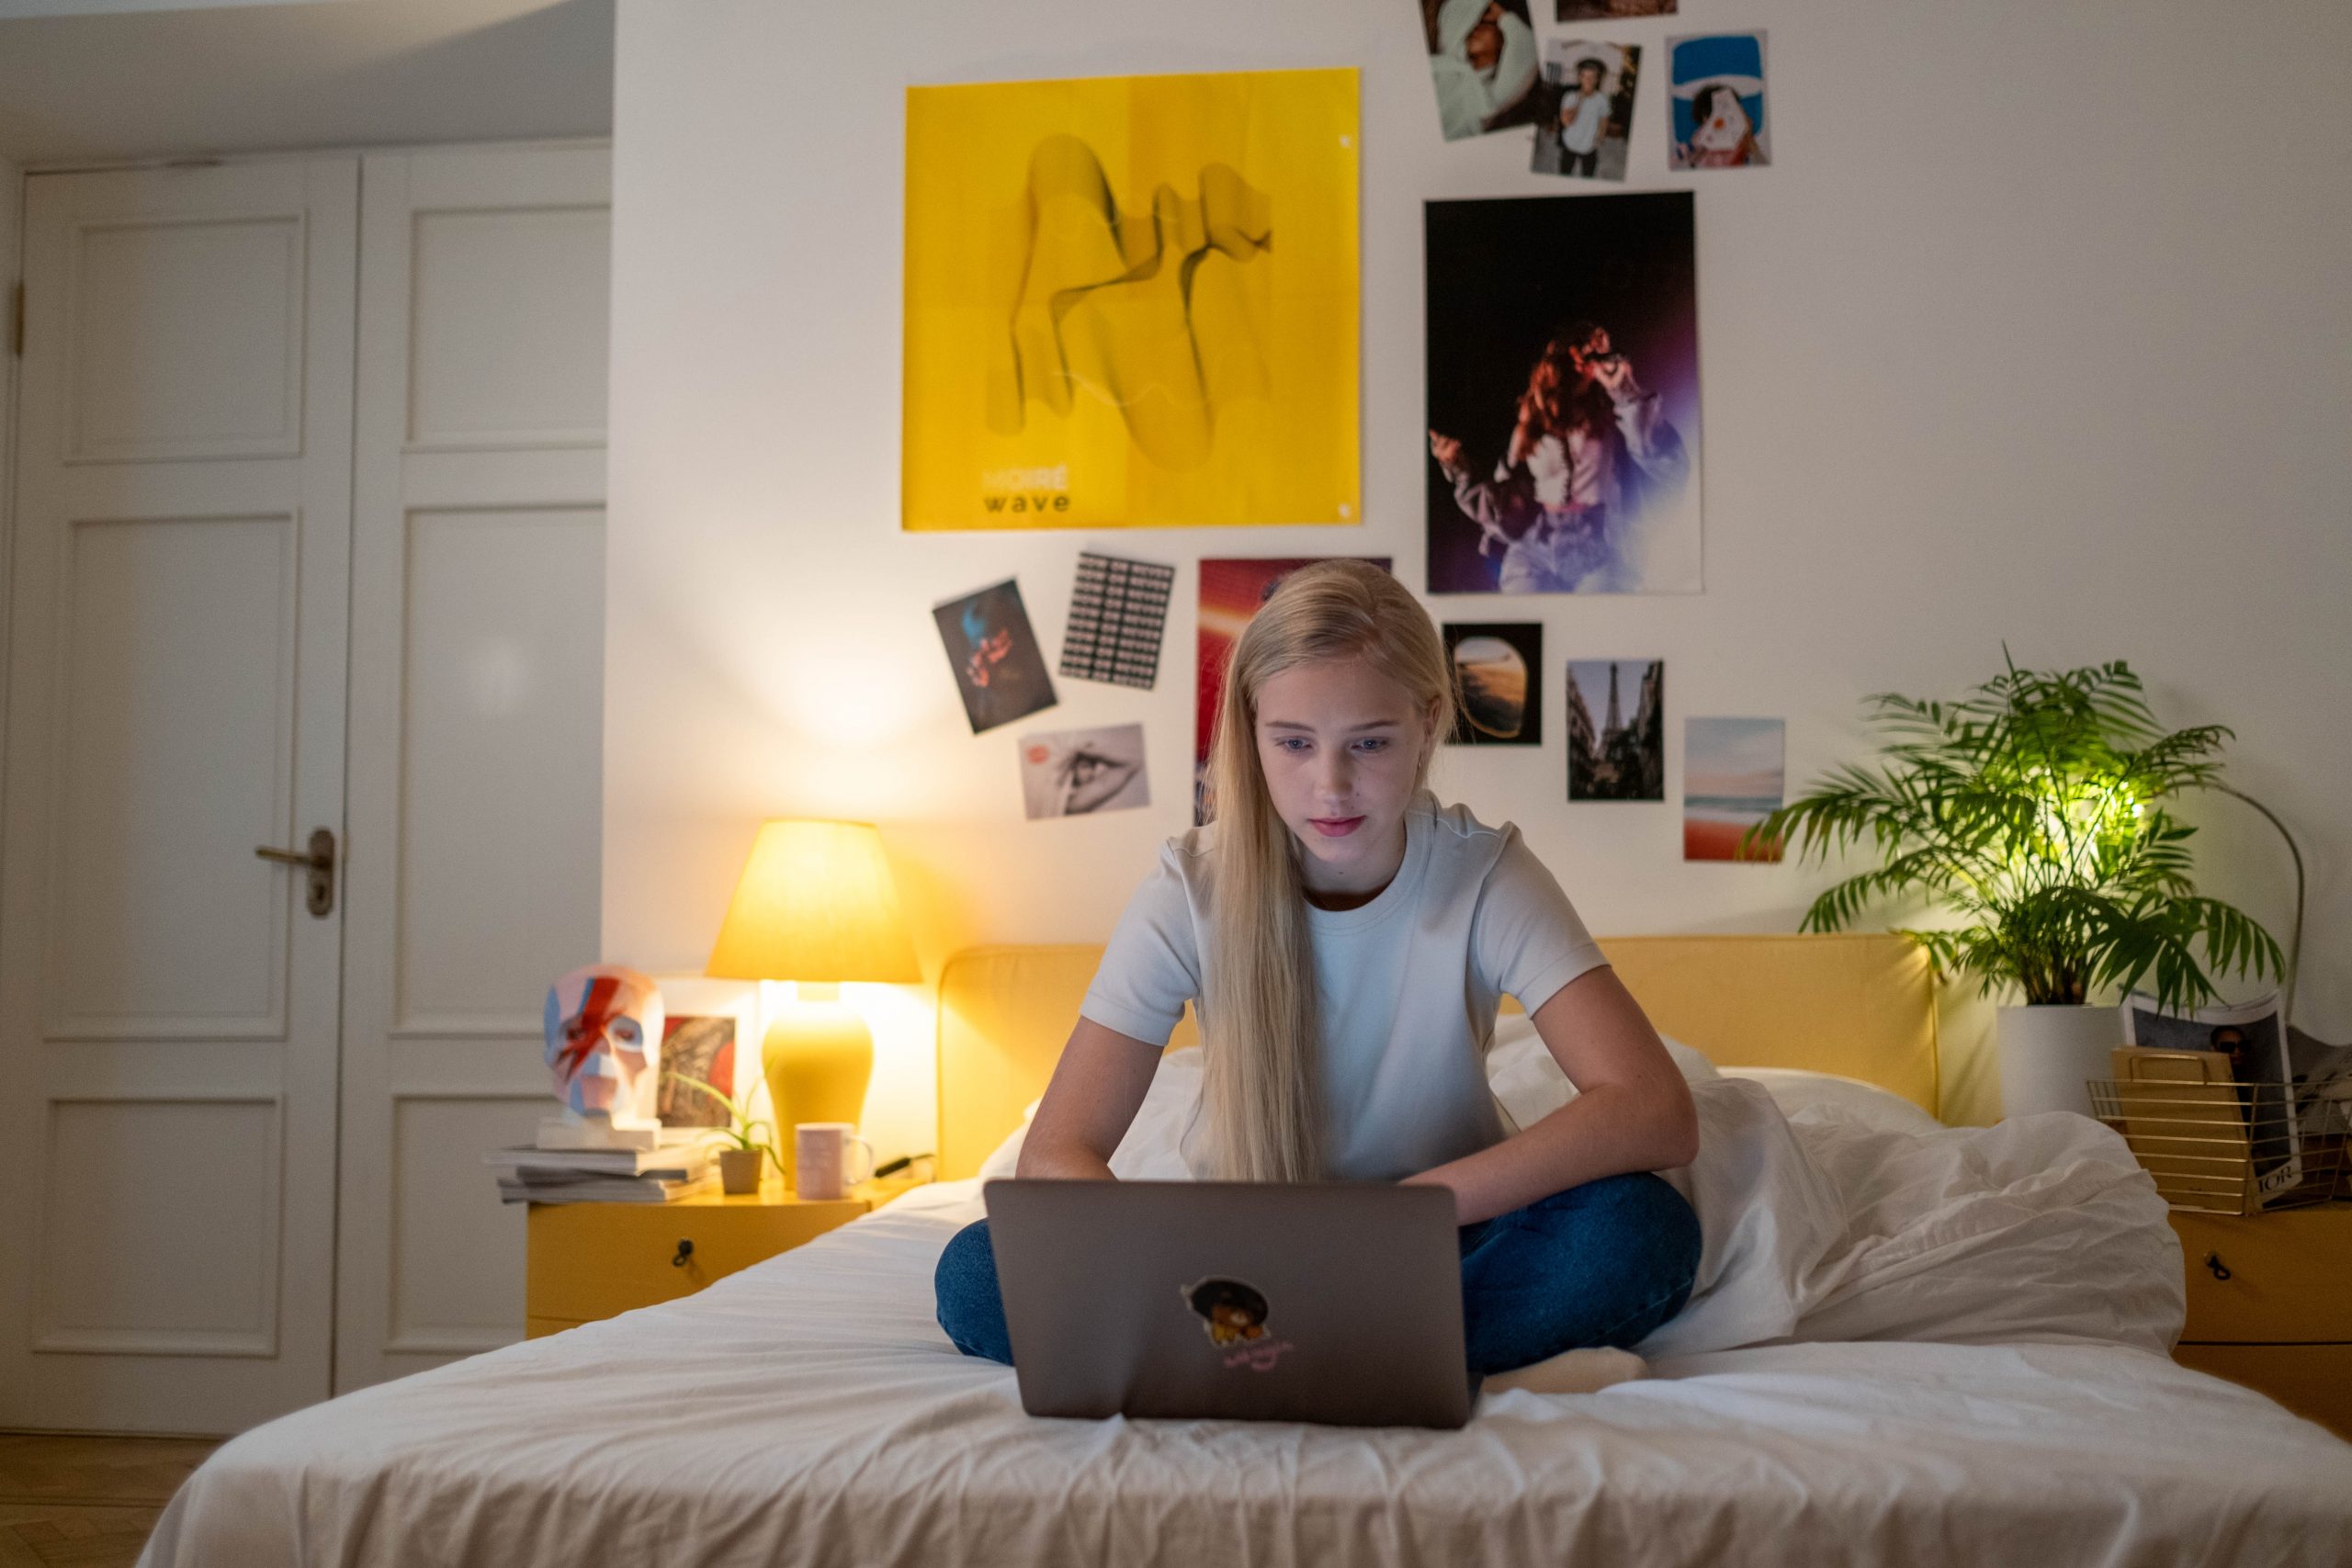 Sitting alone on her bed, a blonde teenager works anxiously on her MacBook.